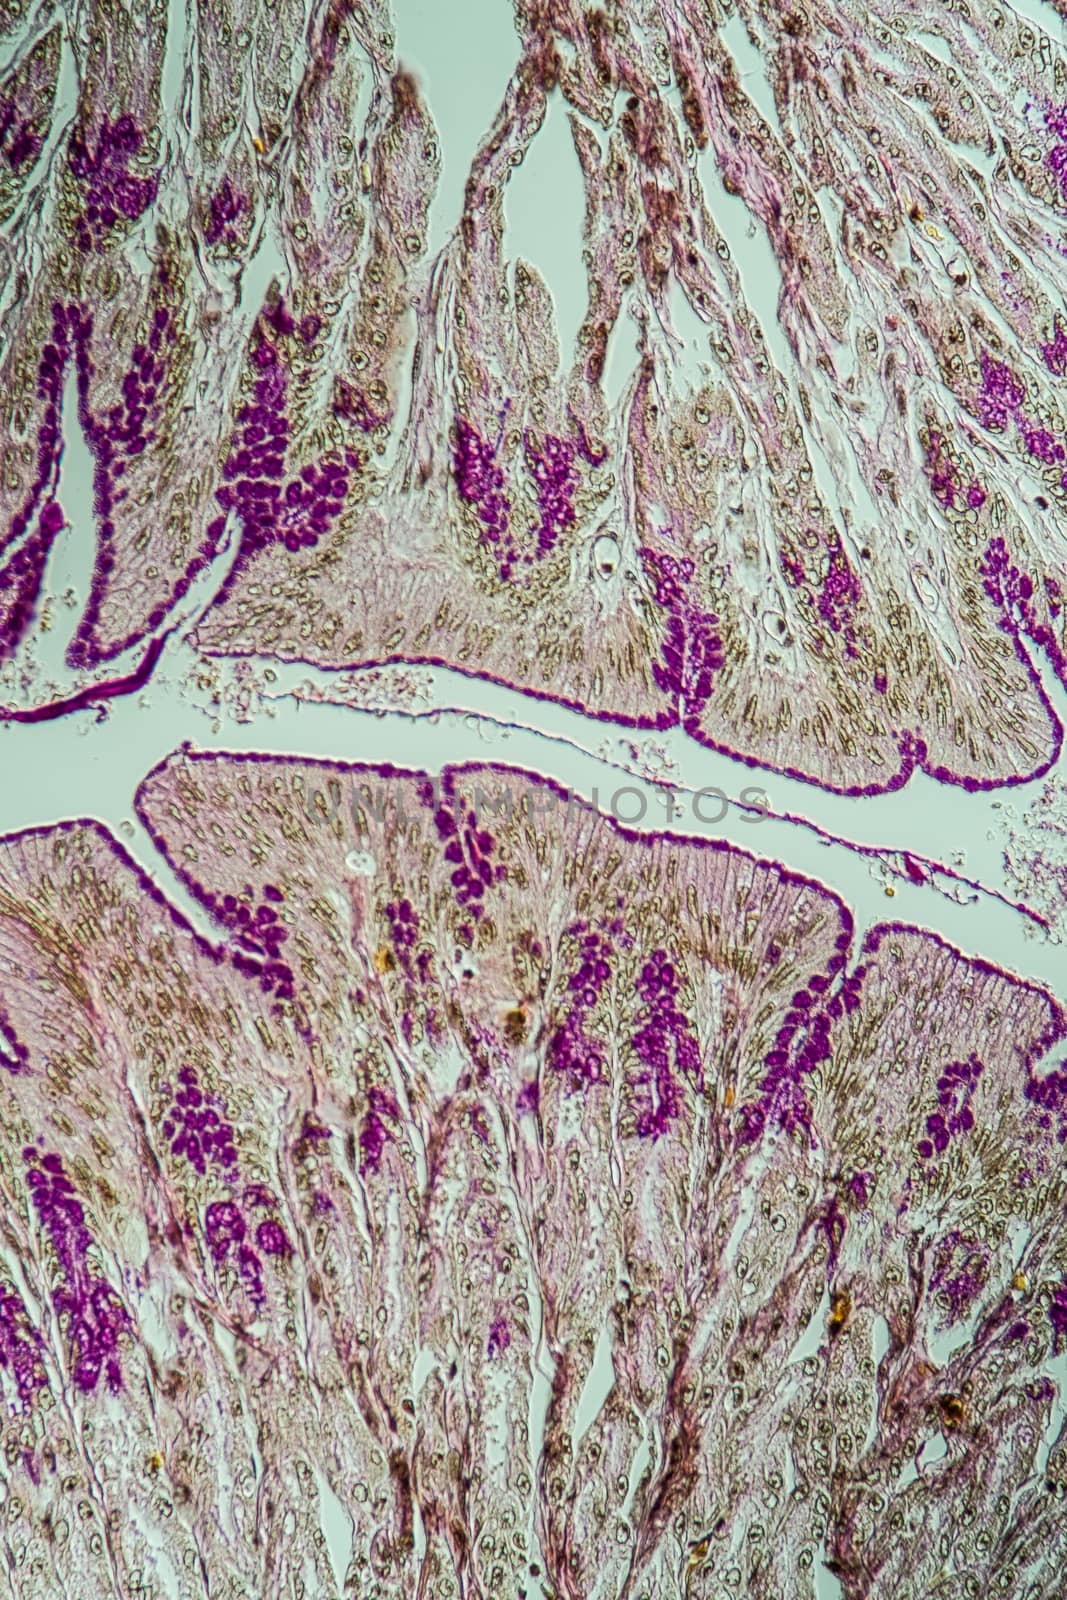 Cross-section through the intestine with glands 200x